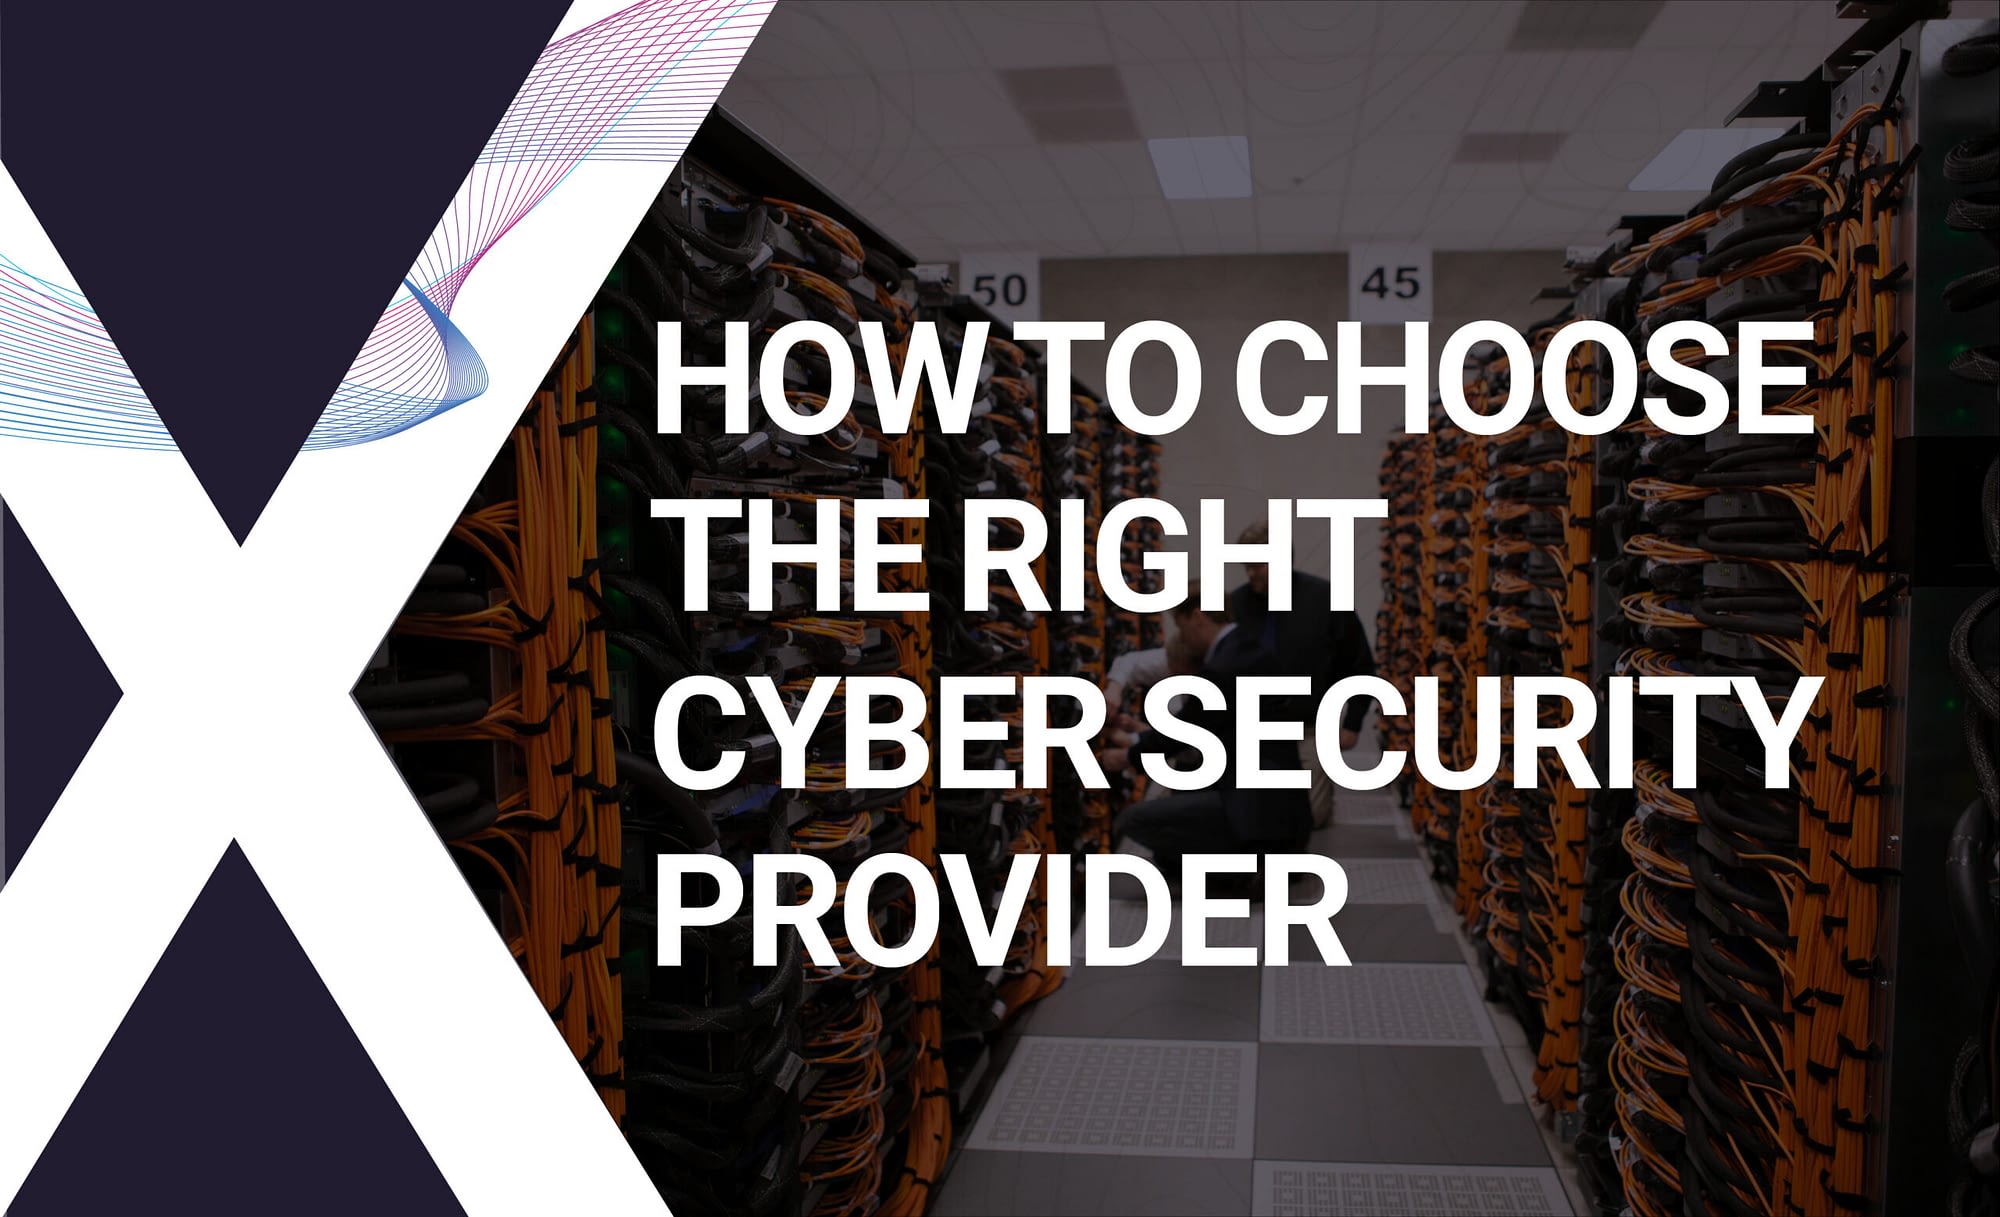 How to choose the right cyber security provider for your business